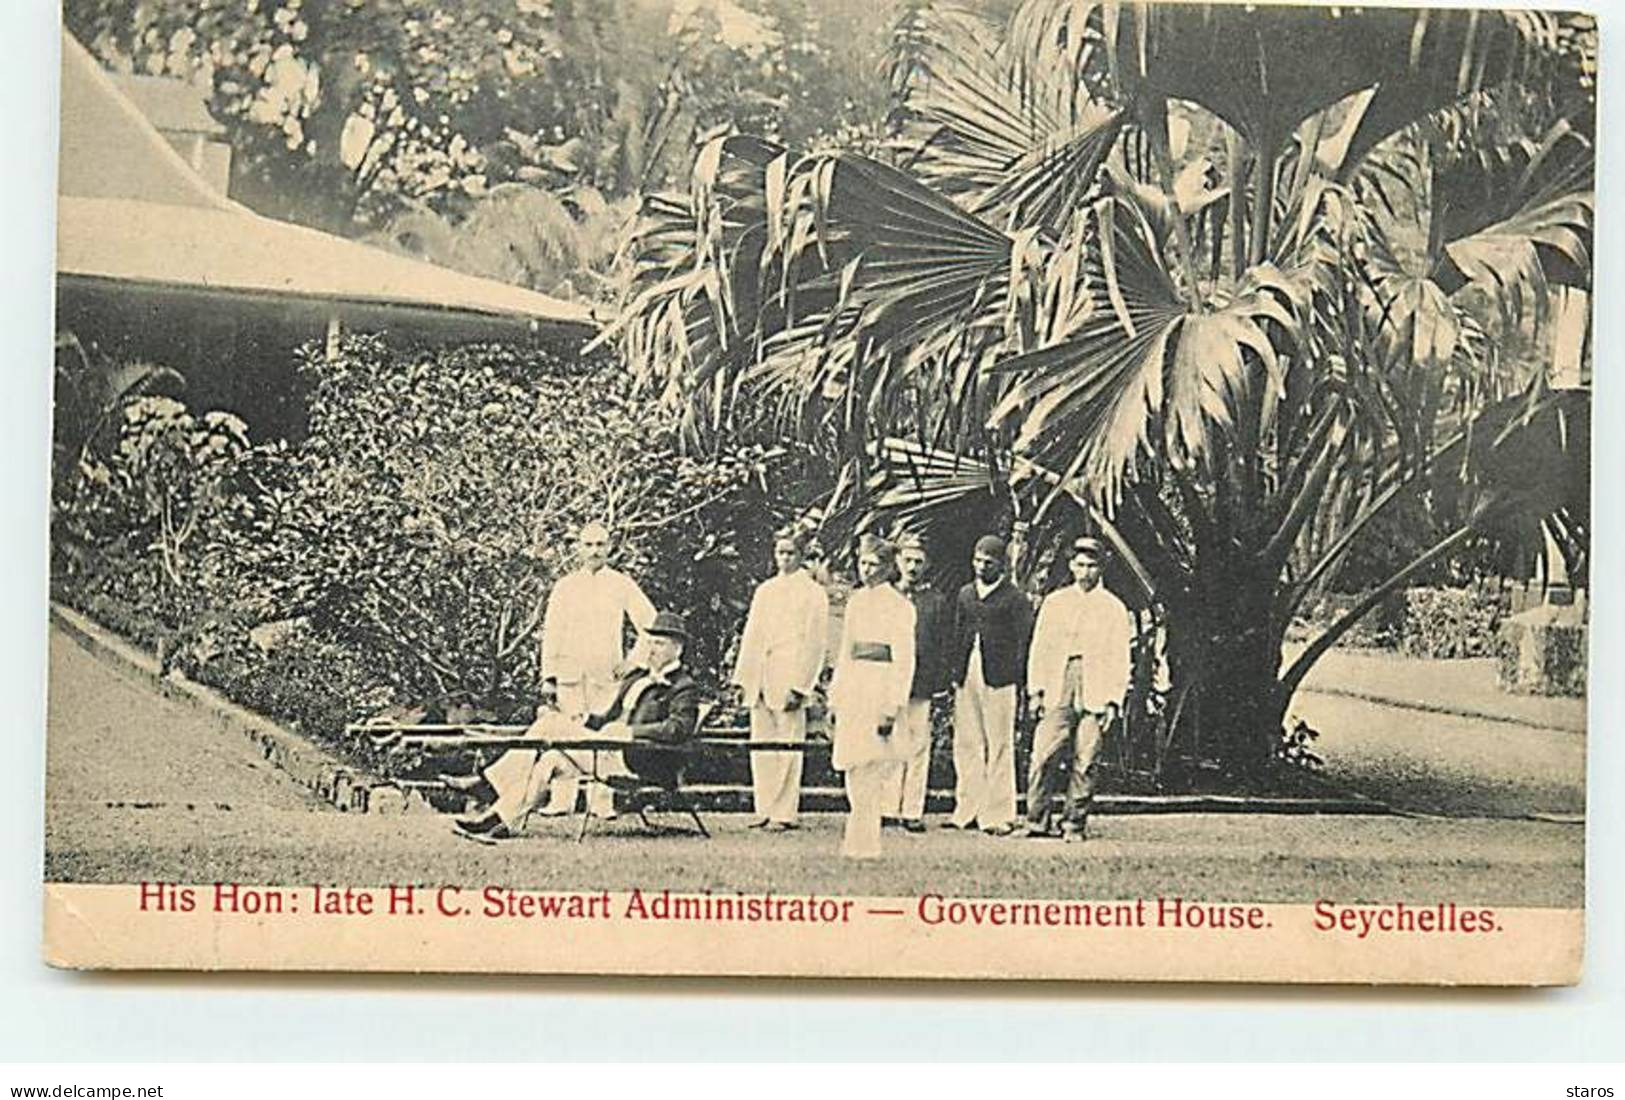 Seychelles - Governement House - His Hon : Late H.C. Stewart Administrator - Seychelles